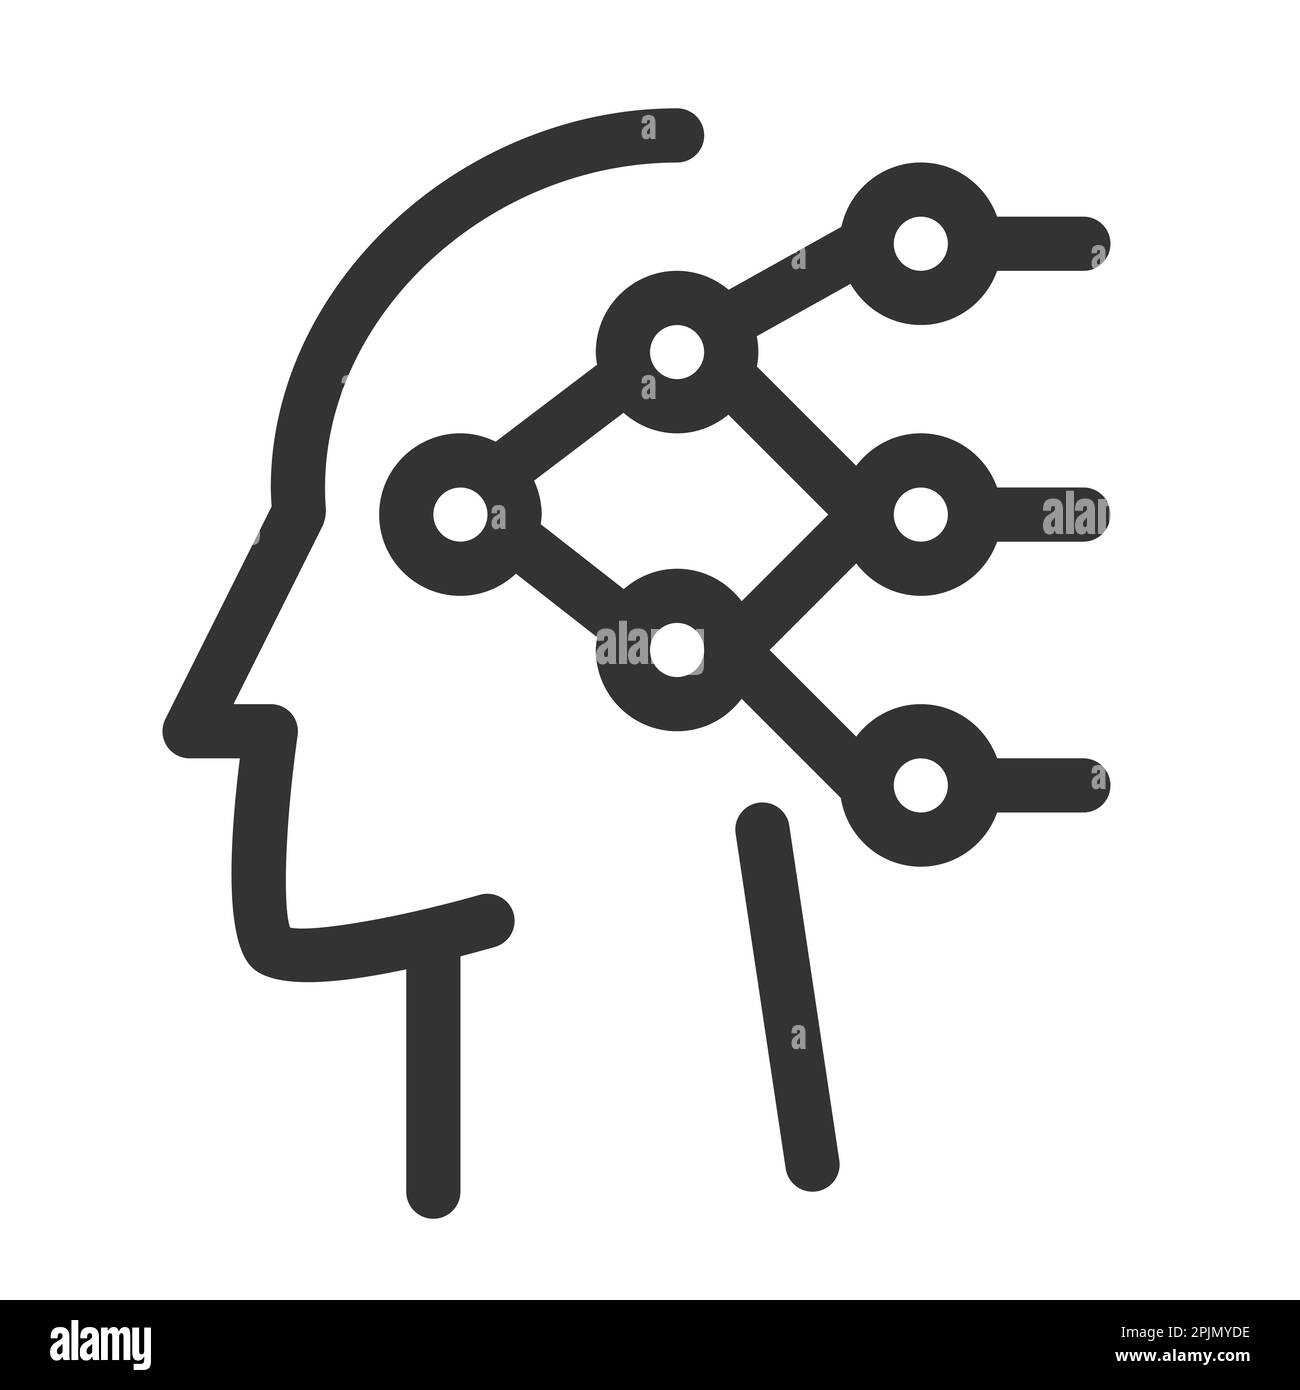 Human head with neural network inside. Artificial intelligence, deep learning concept. Vector illustration Stock Vector